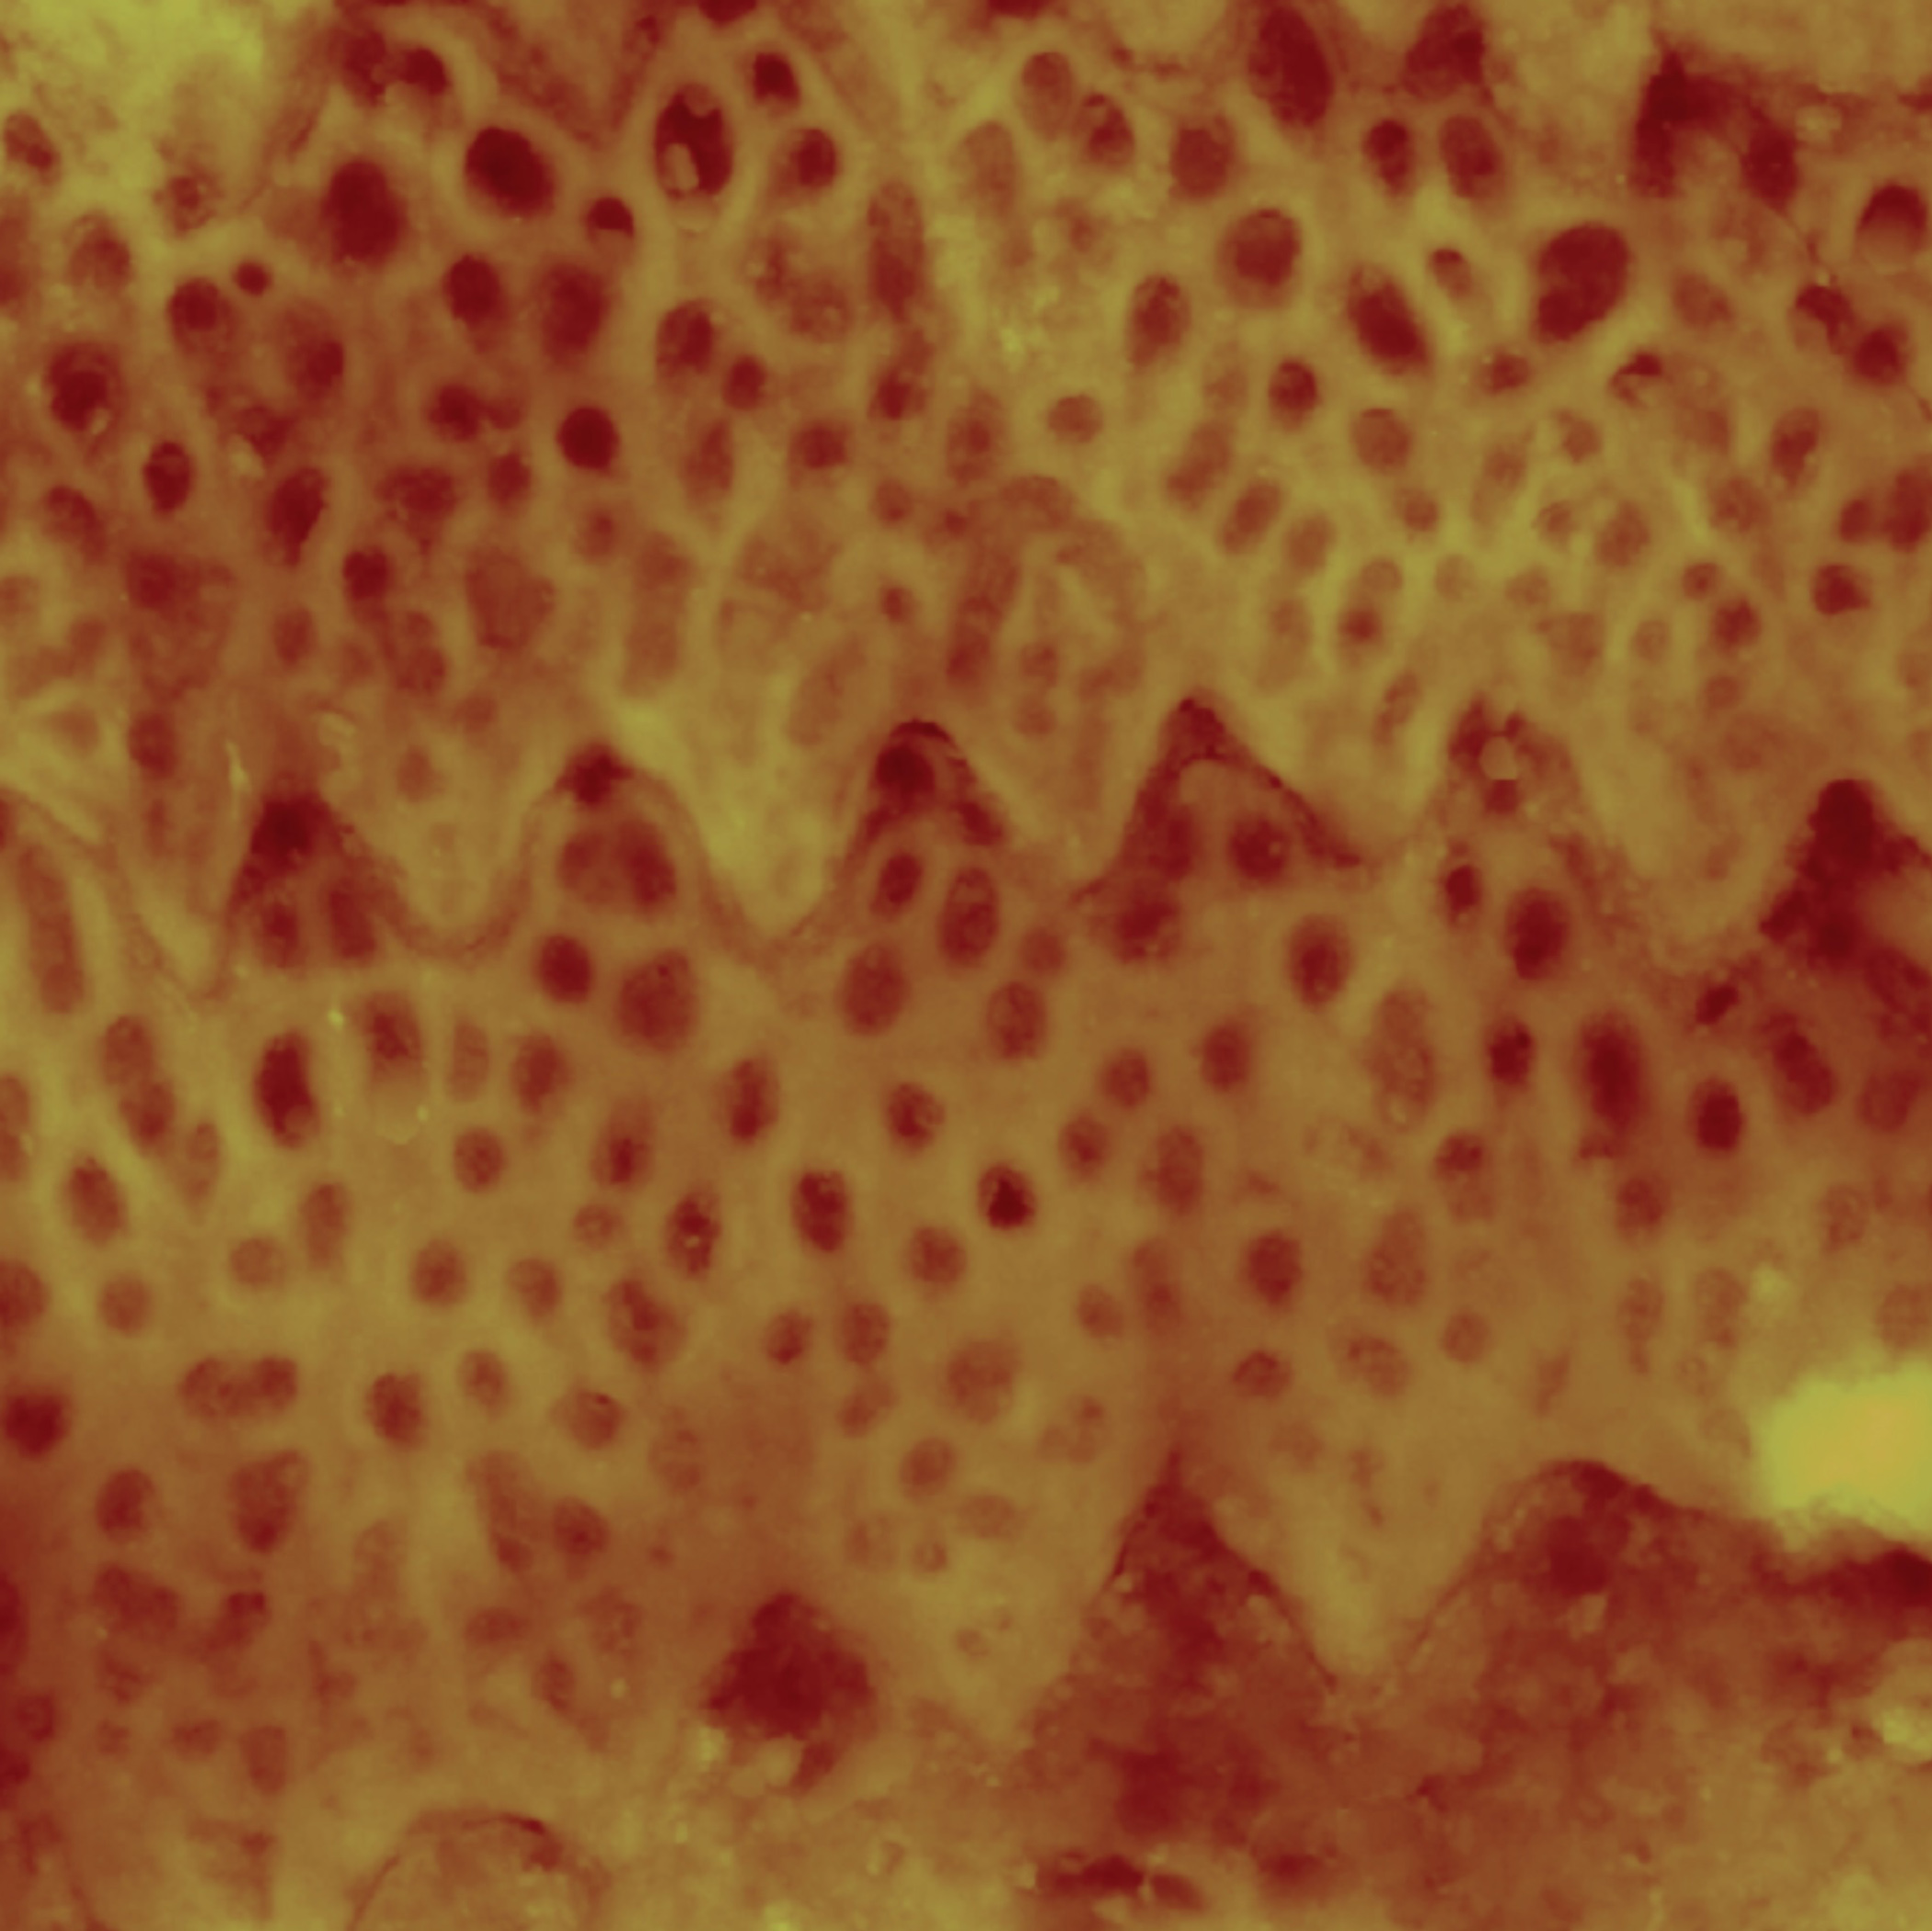 Sidewinder snake microstructures